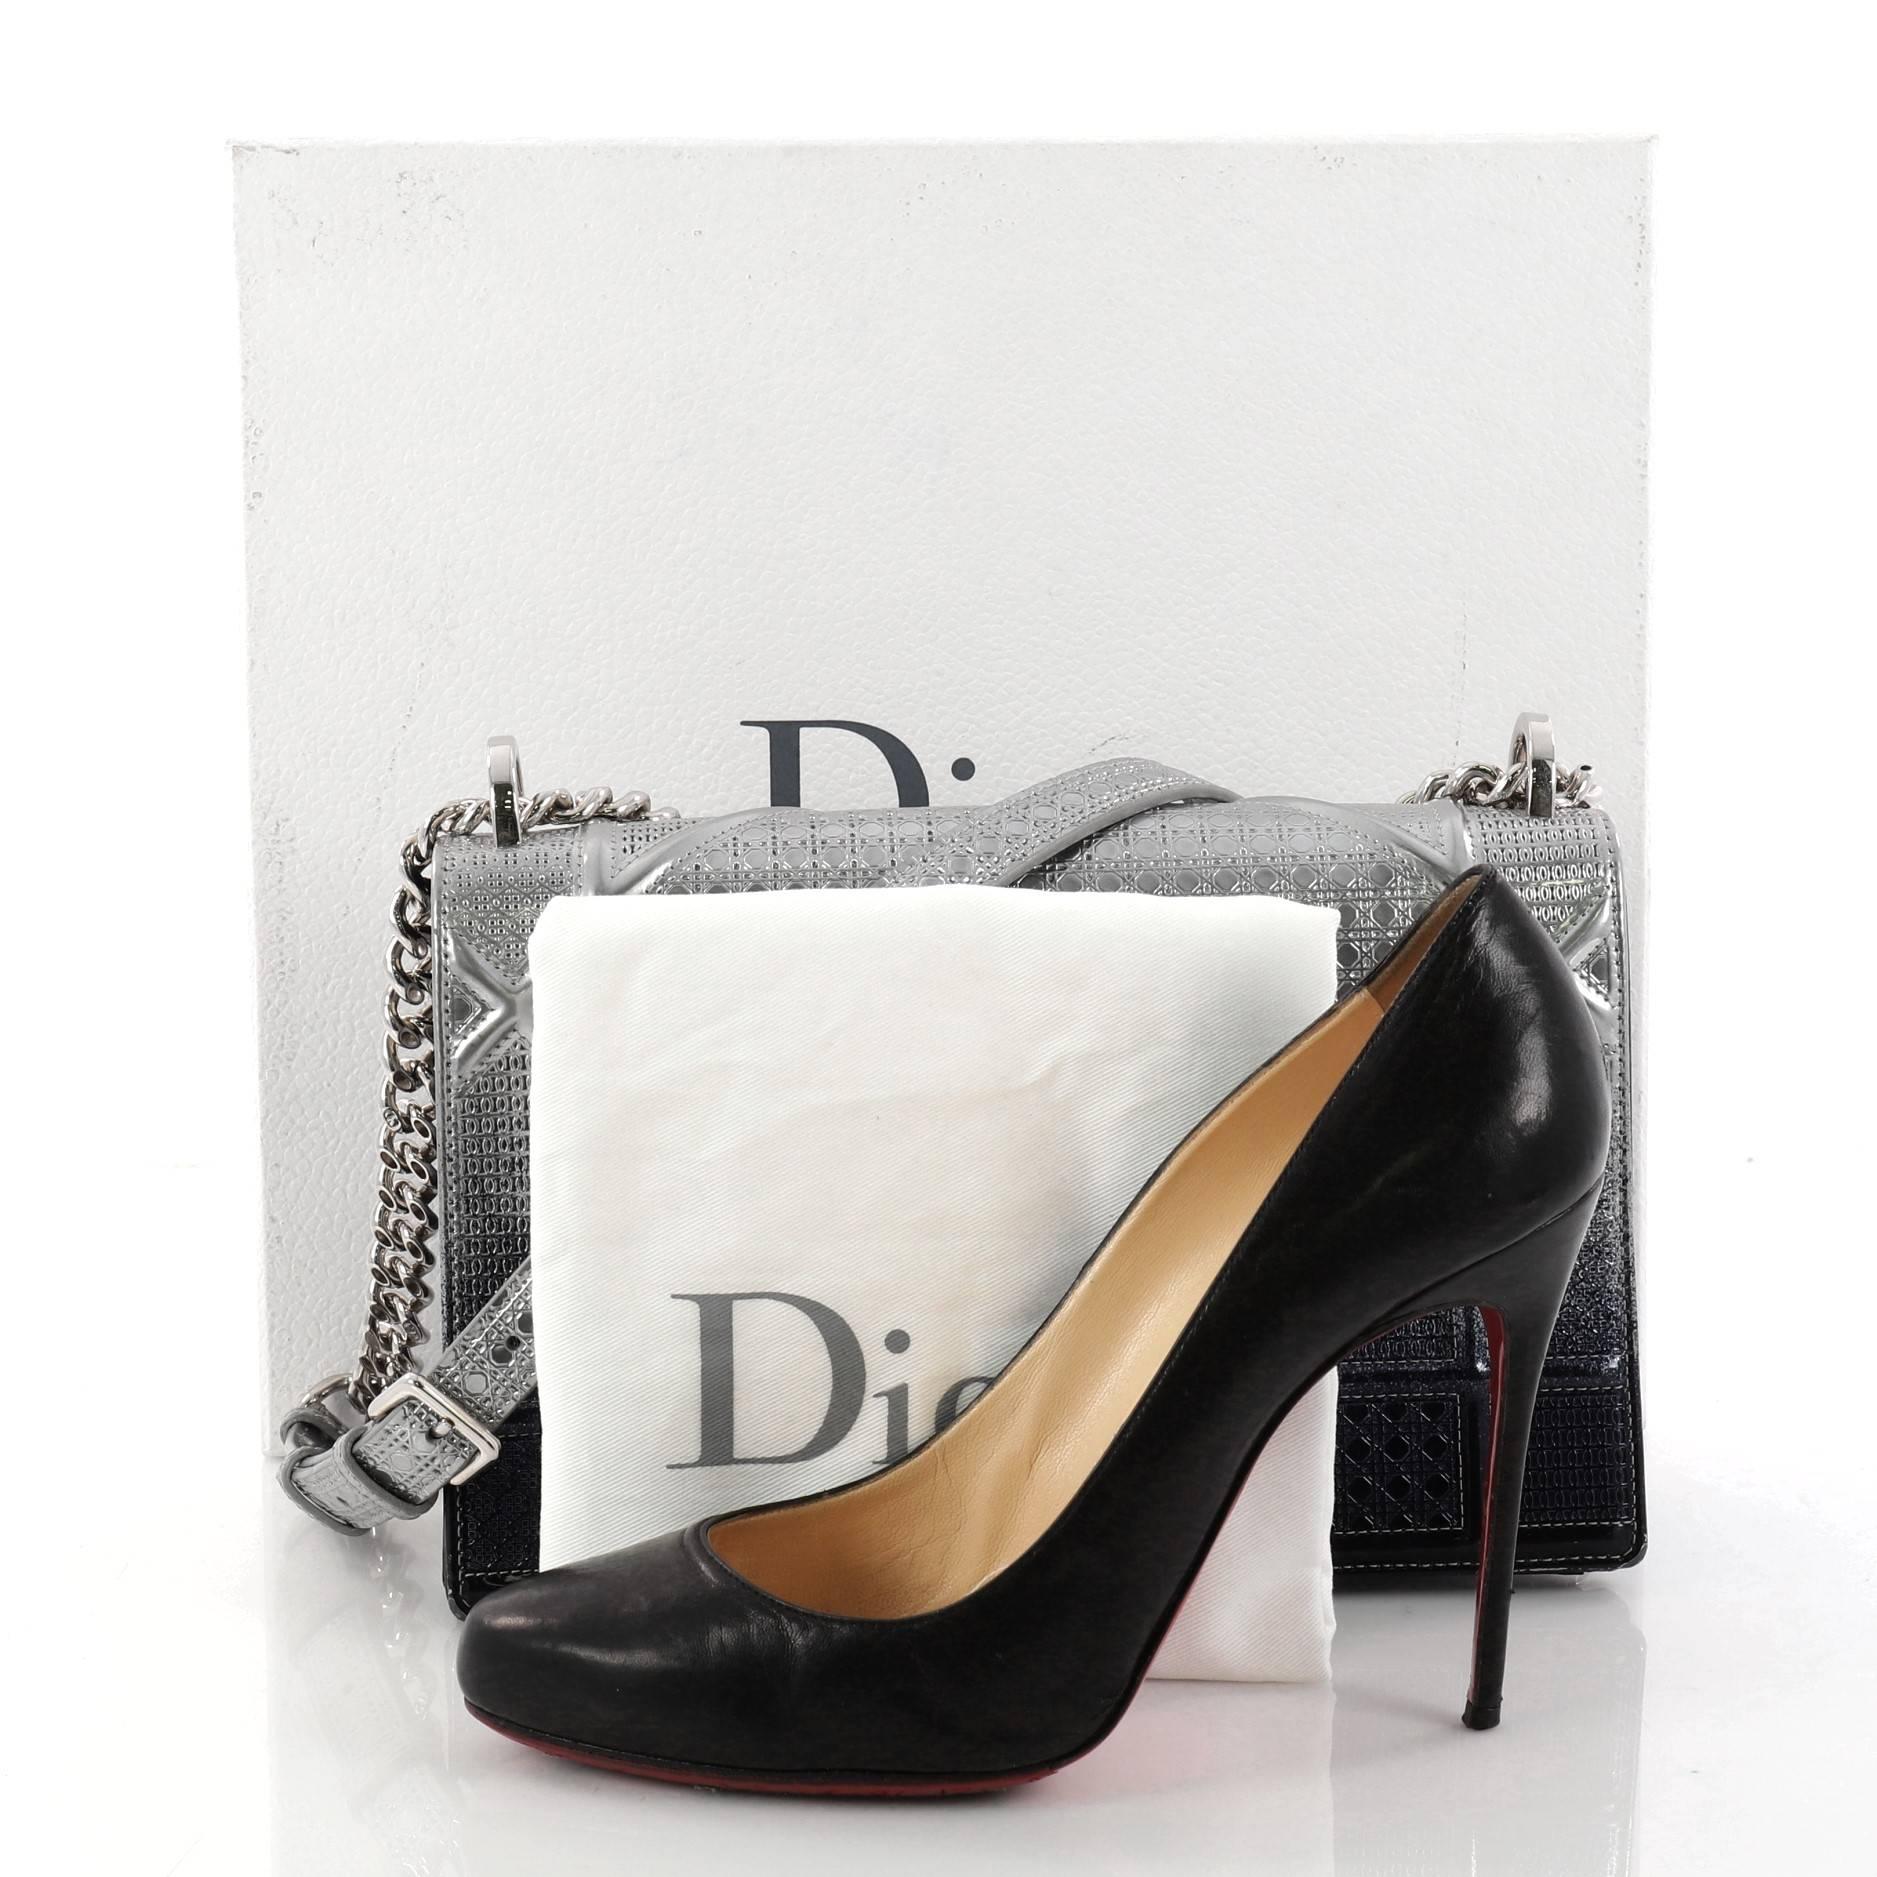 This authentic Christian Dior Diorama Flap Bag Ombre Cannage Embossed Calfskin Medium is a stylish bag that showcases its traditional design with a structured, modern flair. Crafted in sleek silver and blue ombre cannage embossed calfskin, this